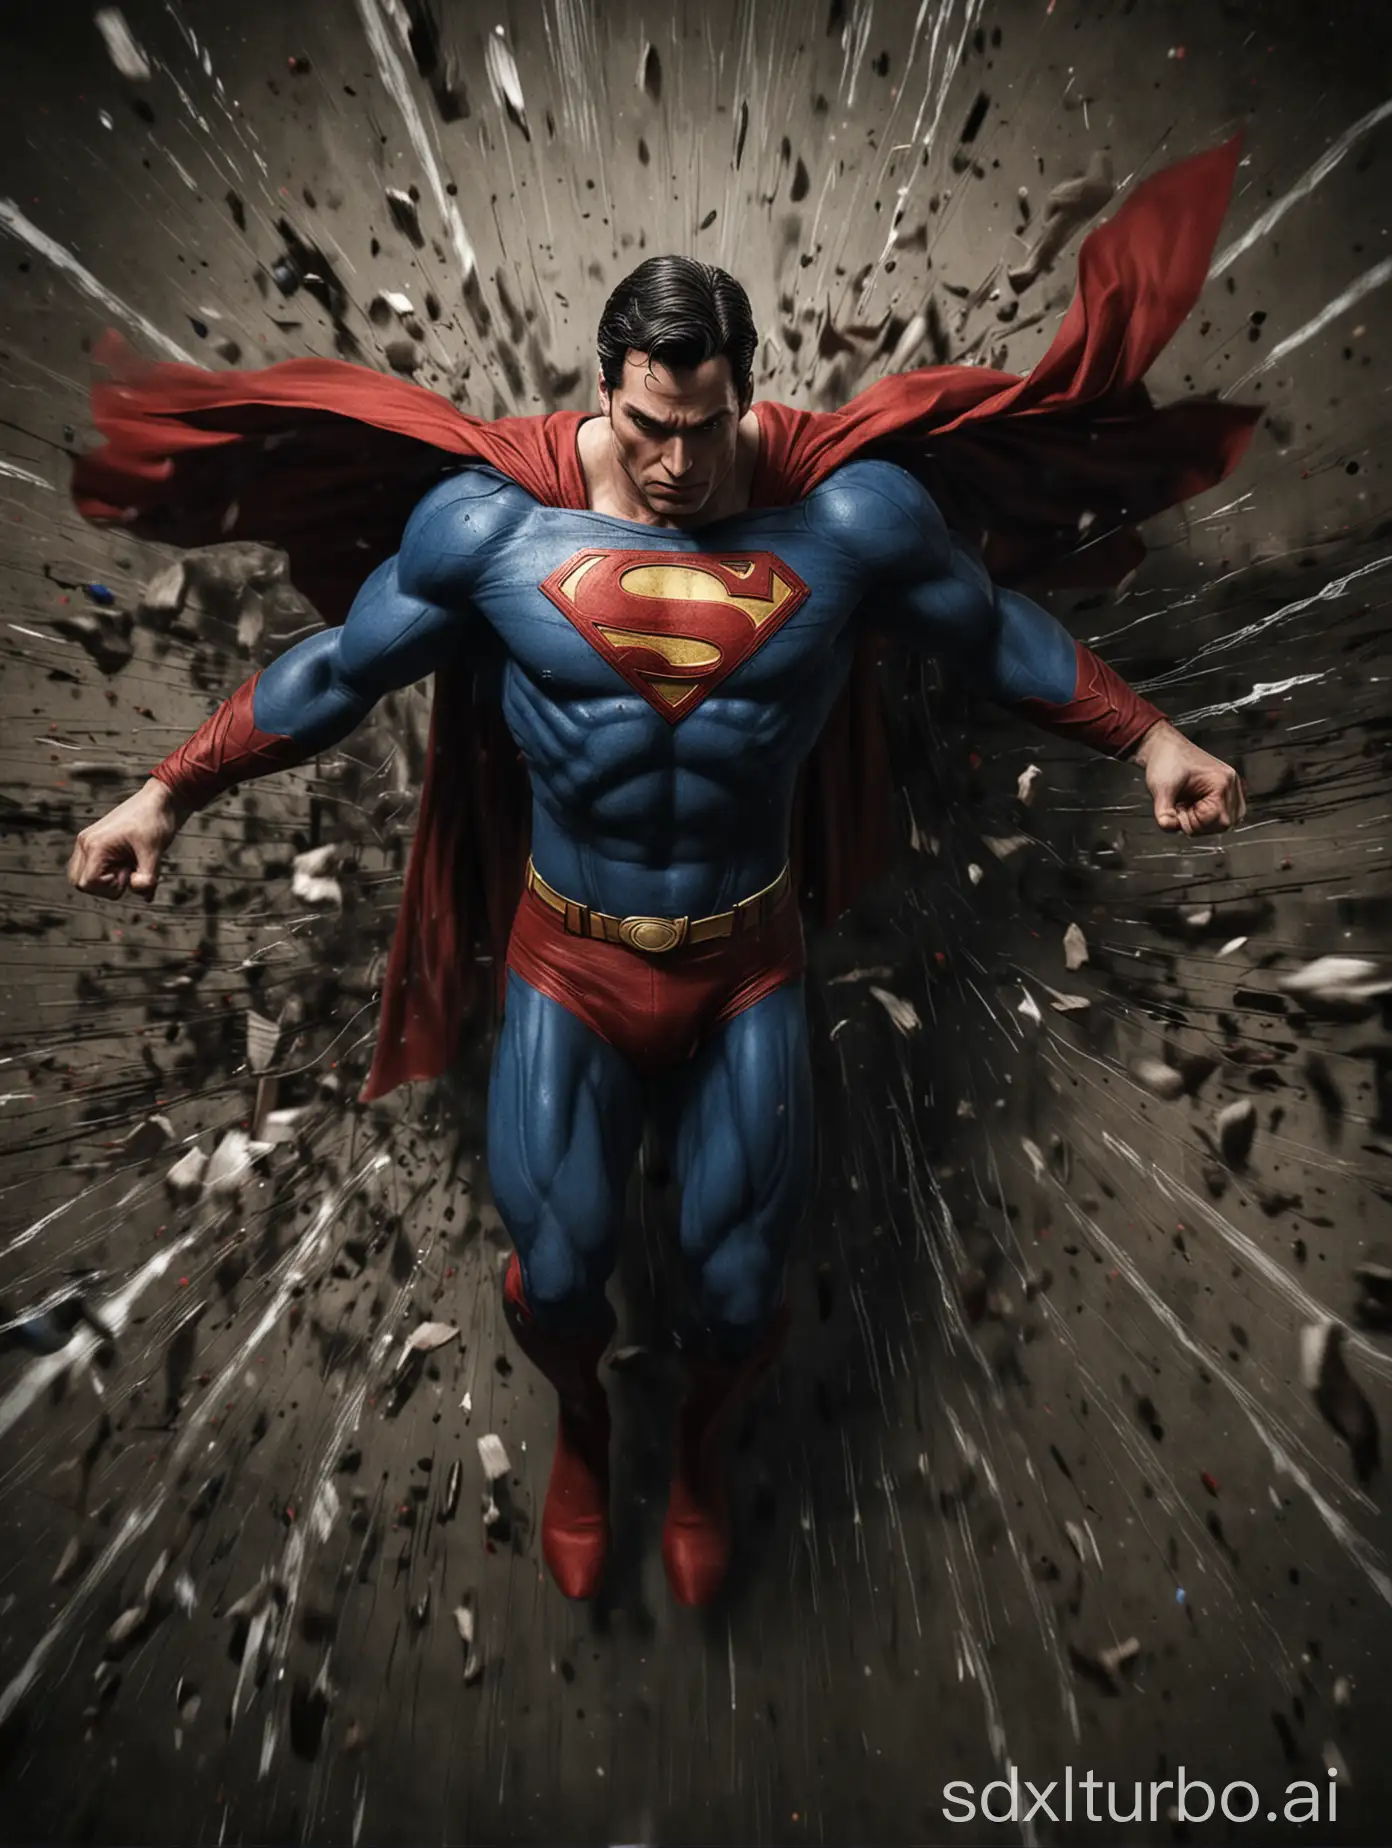 High angle with dynamic Zoom in effect+ Long Exposure effect, Superman Illustration, STAN WINSTON STYLE